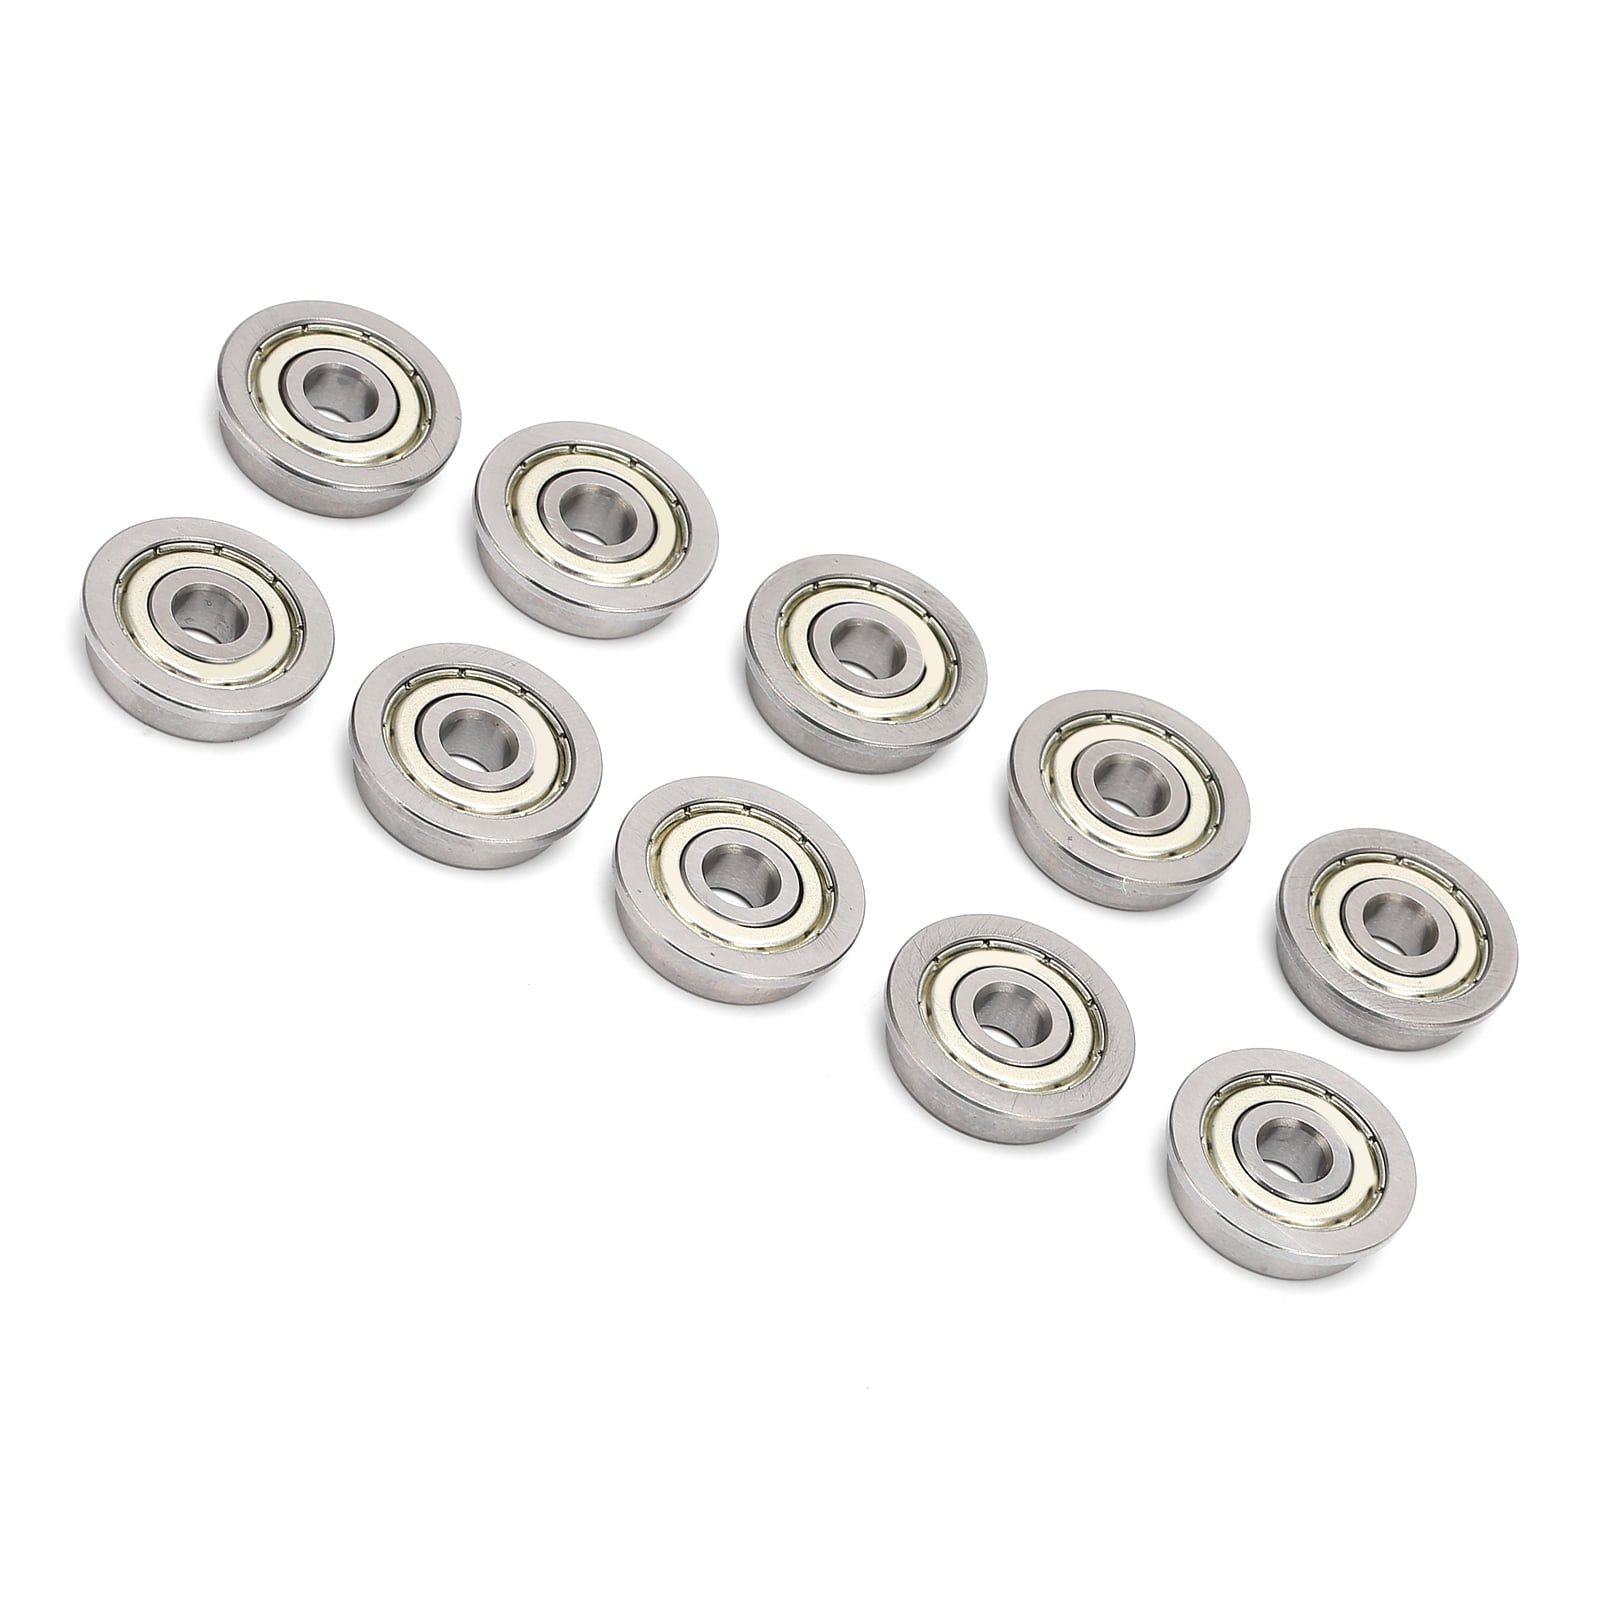 ExcLent 10Pcs F623Zz Mini Metal Double Shielded Flanged Ball Bearings for 3D Printer 